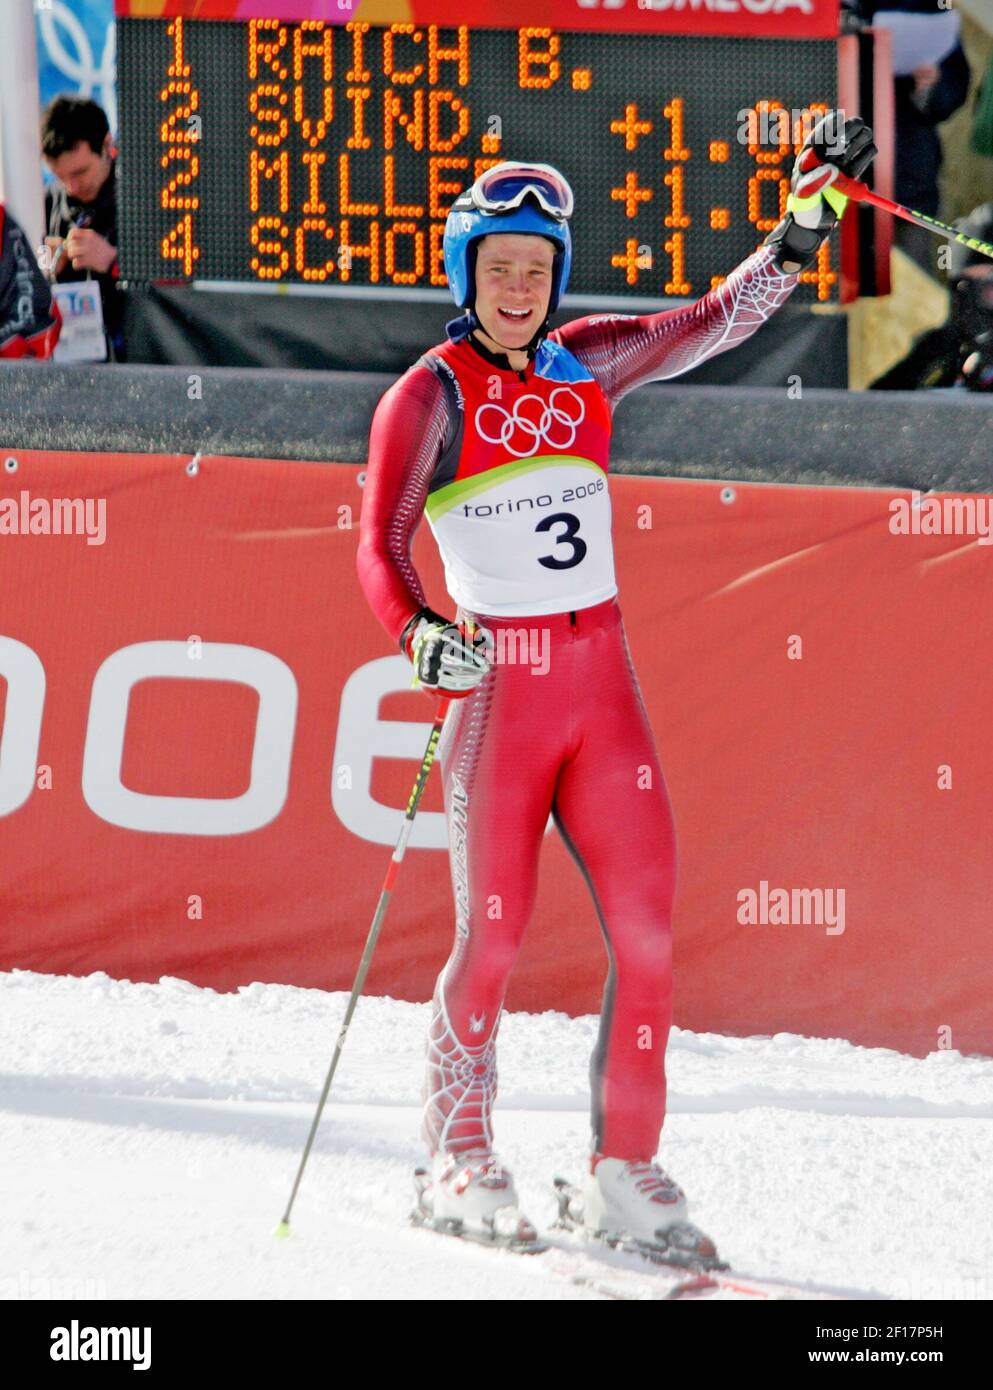 Benjamin Raich of Austria reacts after his gold medal run in the men's giant Slalom at the Turin 2006 Winter Olympic Games in Sestriere Colle, Italy Monday February 20, 2006. (Ron Jenkins./ Fort Worth Star-Telegram/ KRT) Stock Photo